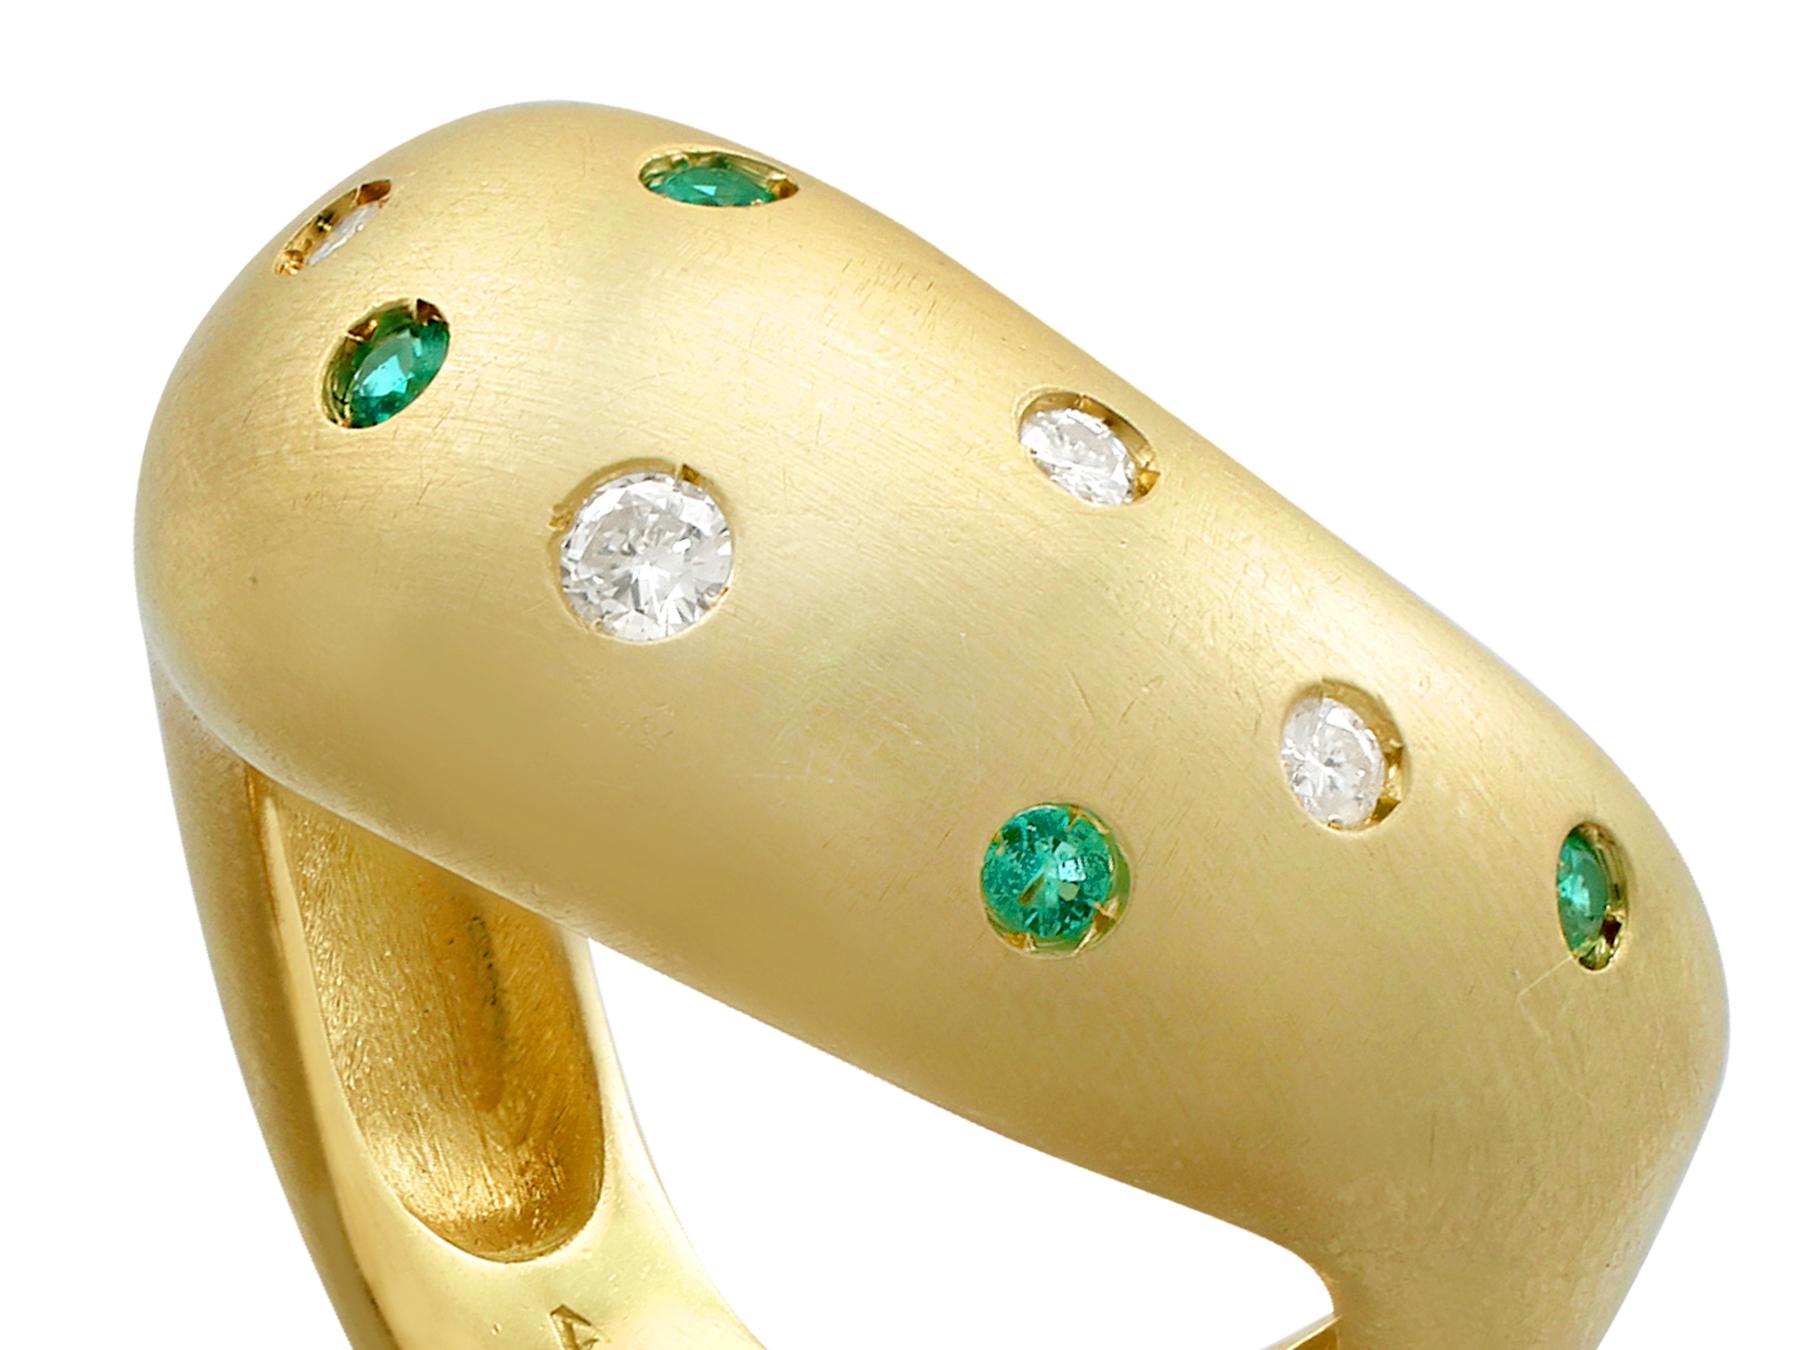 An impressive vintage 1960s 0.13 carat emerald and 0.15 carat diamond, 18 karat yellow gold dress ring; part of our diverse vintage jewelry and estate jewelry collections.

This fine and impressive chunky gold ring with gemstones has been crafted in